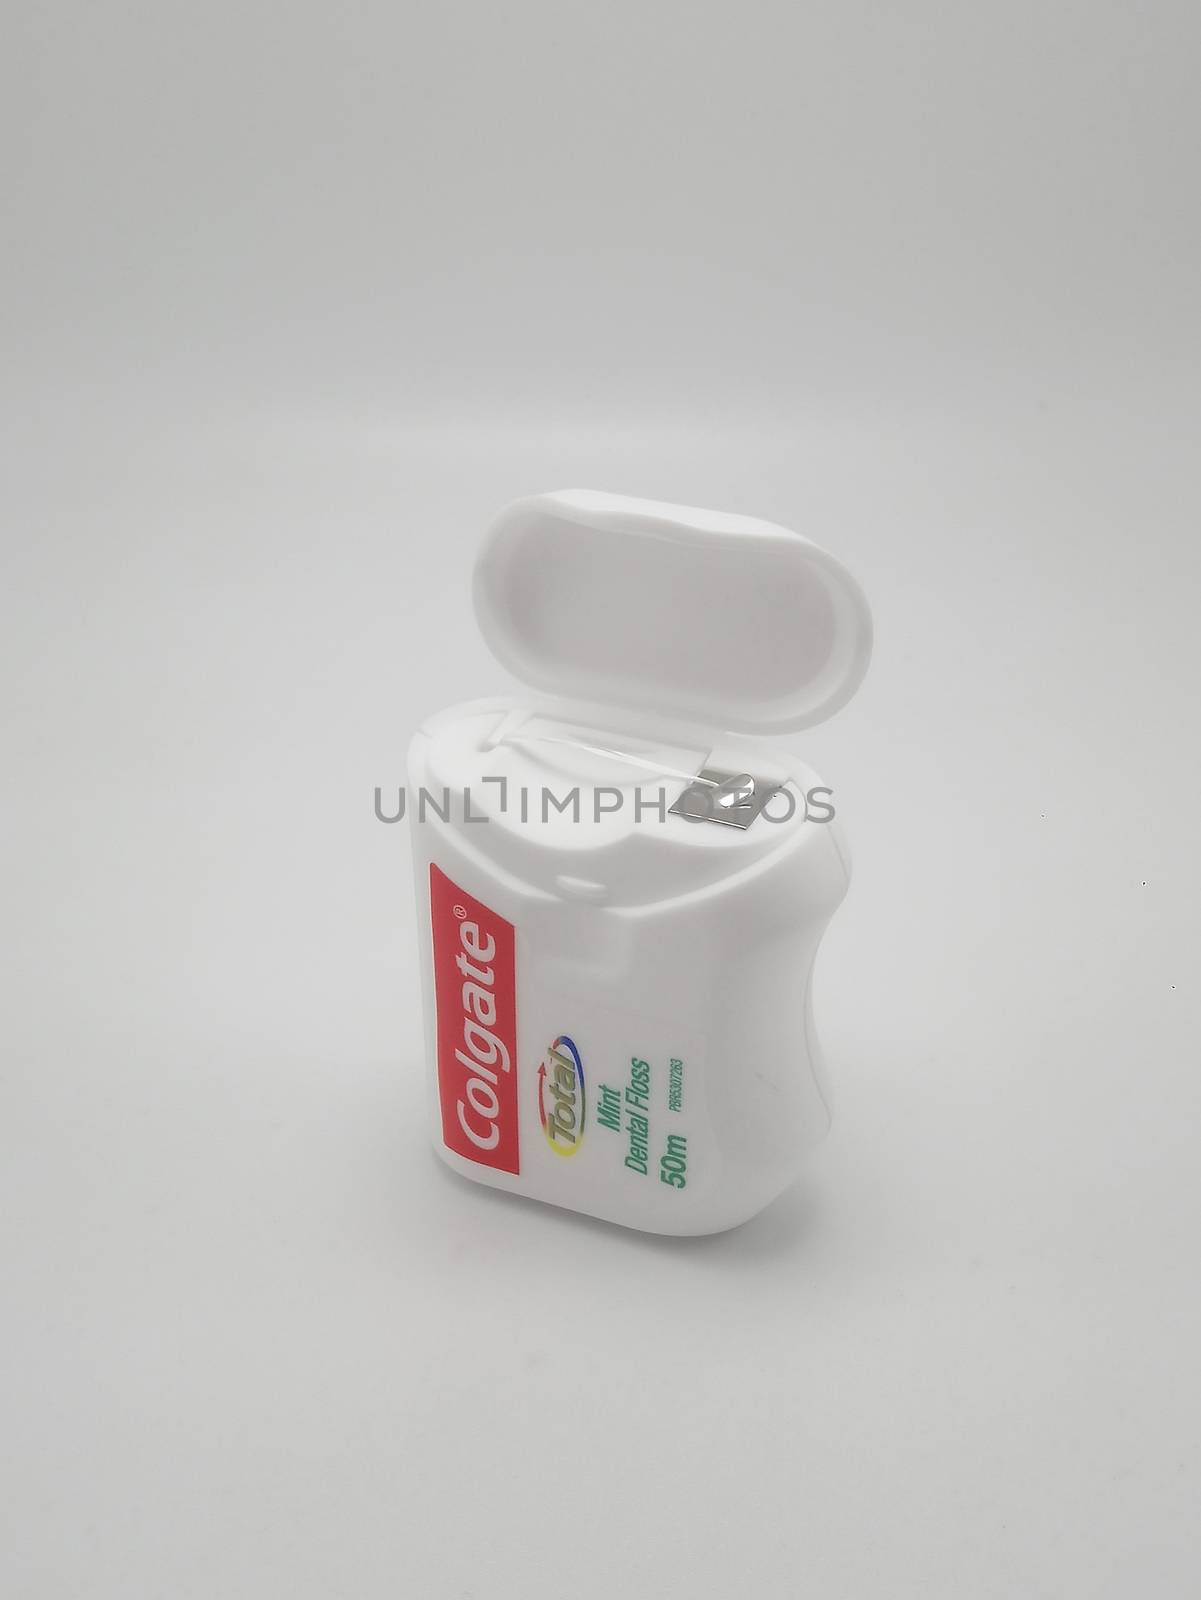 Colgate total mint dental floss in Manila, Philippines by imwaltersy